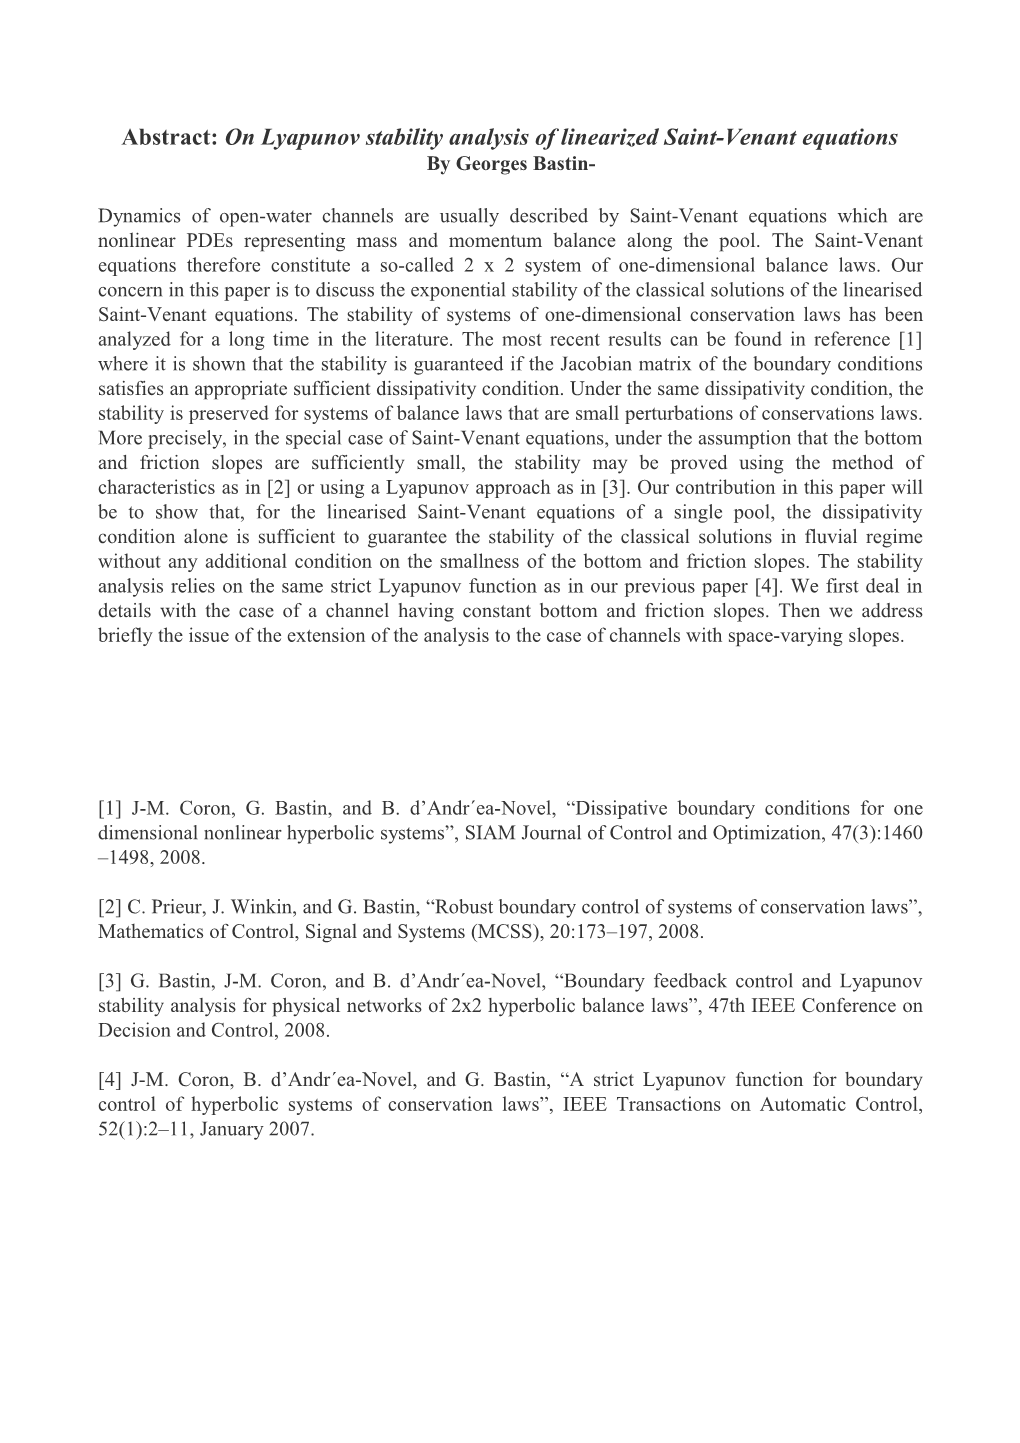 Abstract: on Lyapunov Stability Analysis of Linearized Saint-Venant Equations